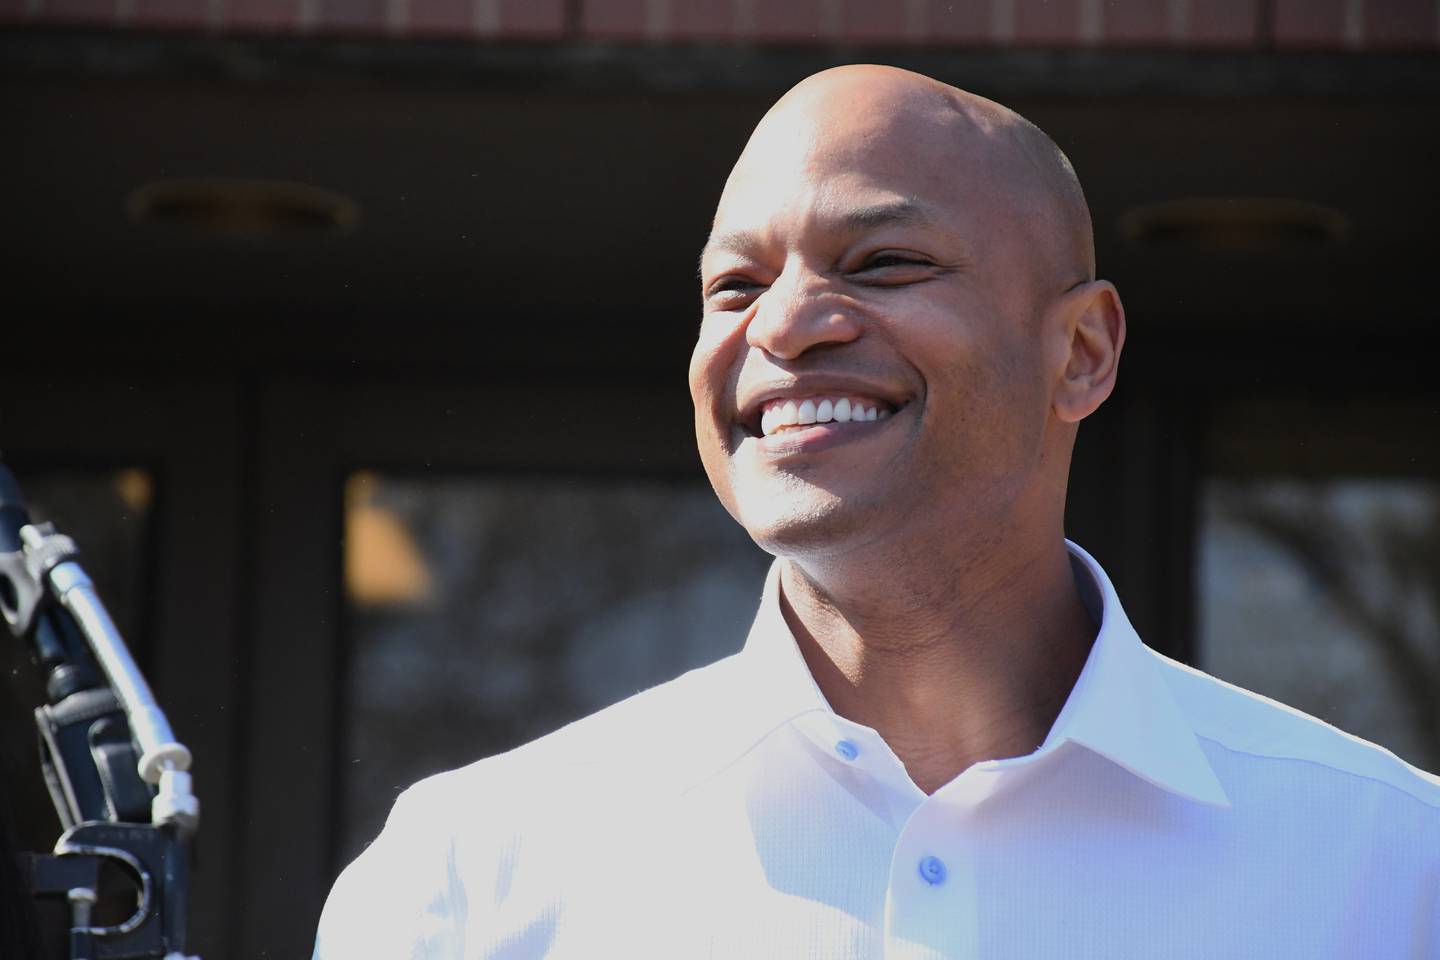 Photo by Pamela Wood/The Baltimore Banner -- Democratic candidate for governor Wes Moore, who lives in Baltimore, speaks during a campaign event in Upper Marlboro on March 5, 2022.